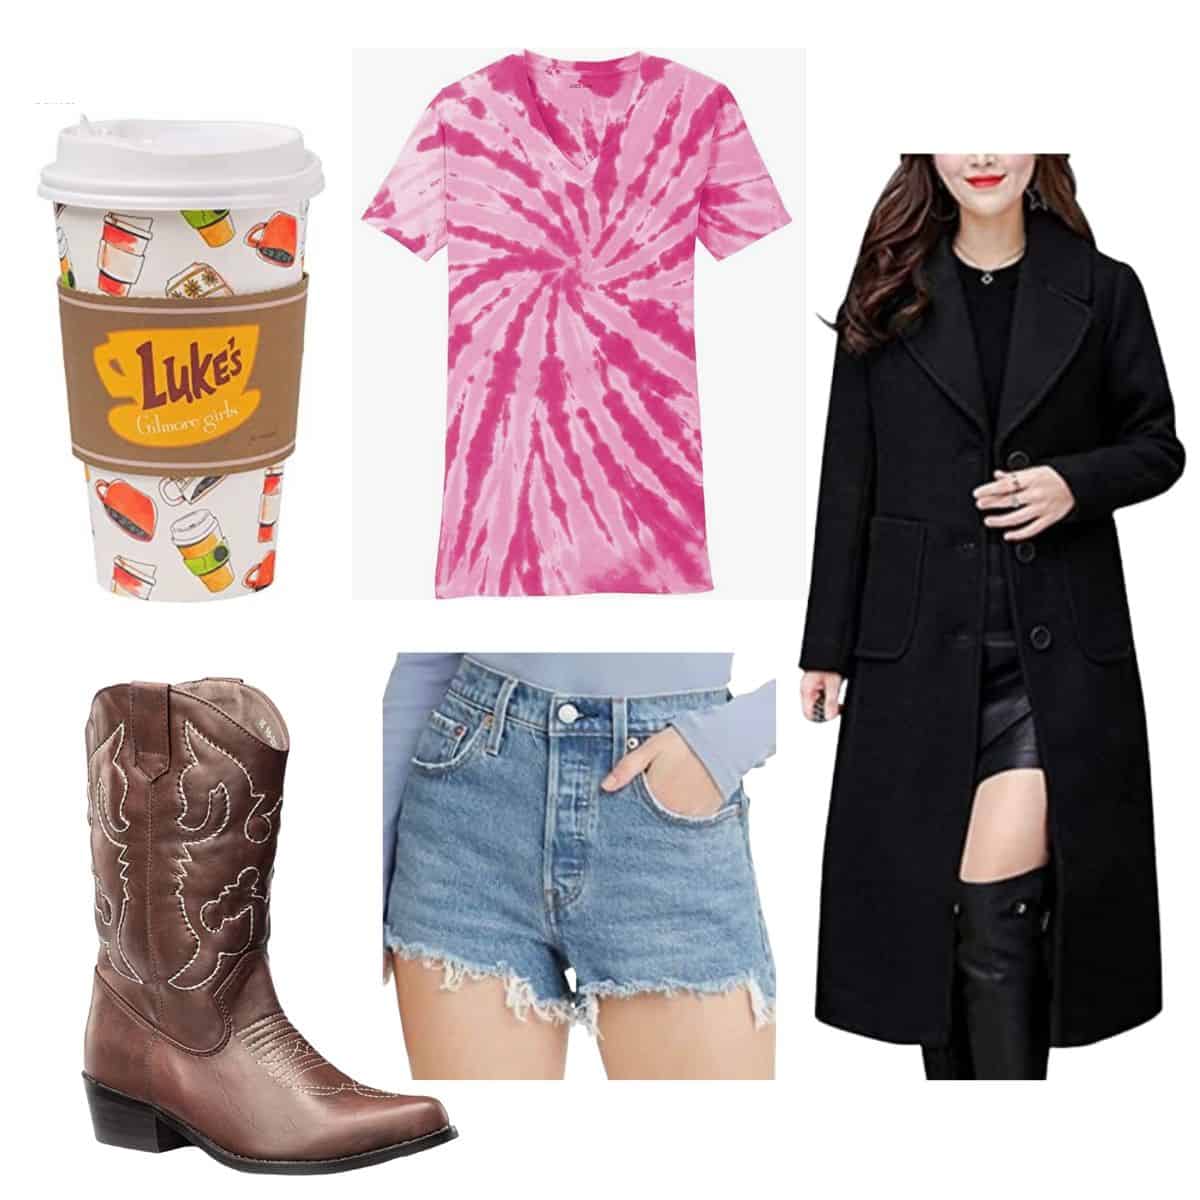 Lorelai Gilmore Costume for Halloween (Cheap and Easy!)